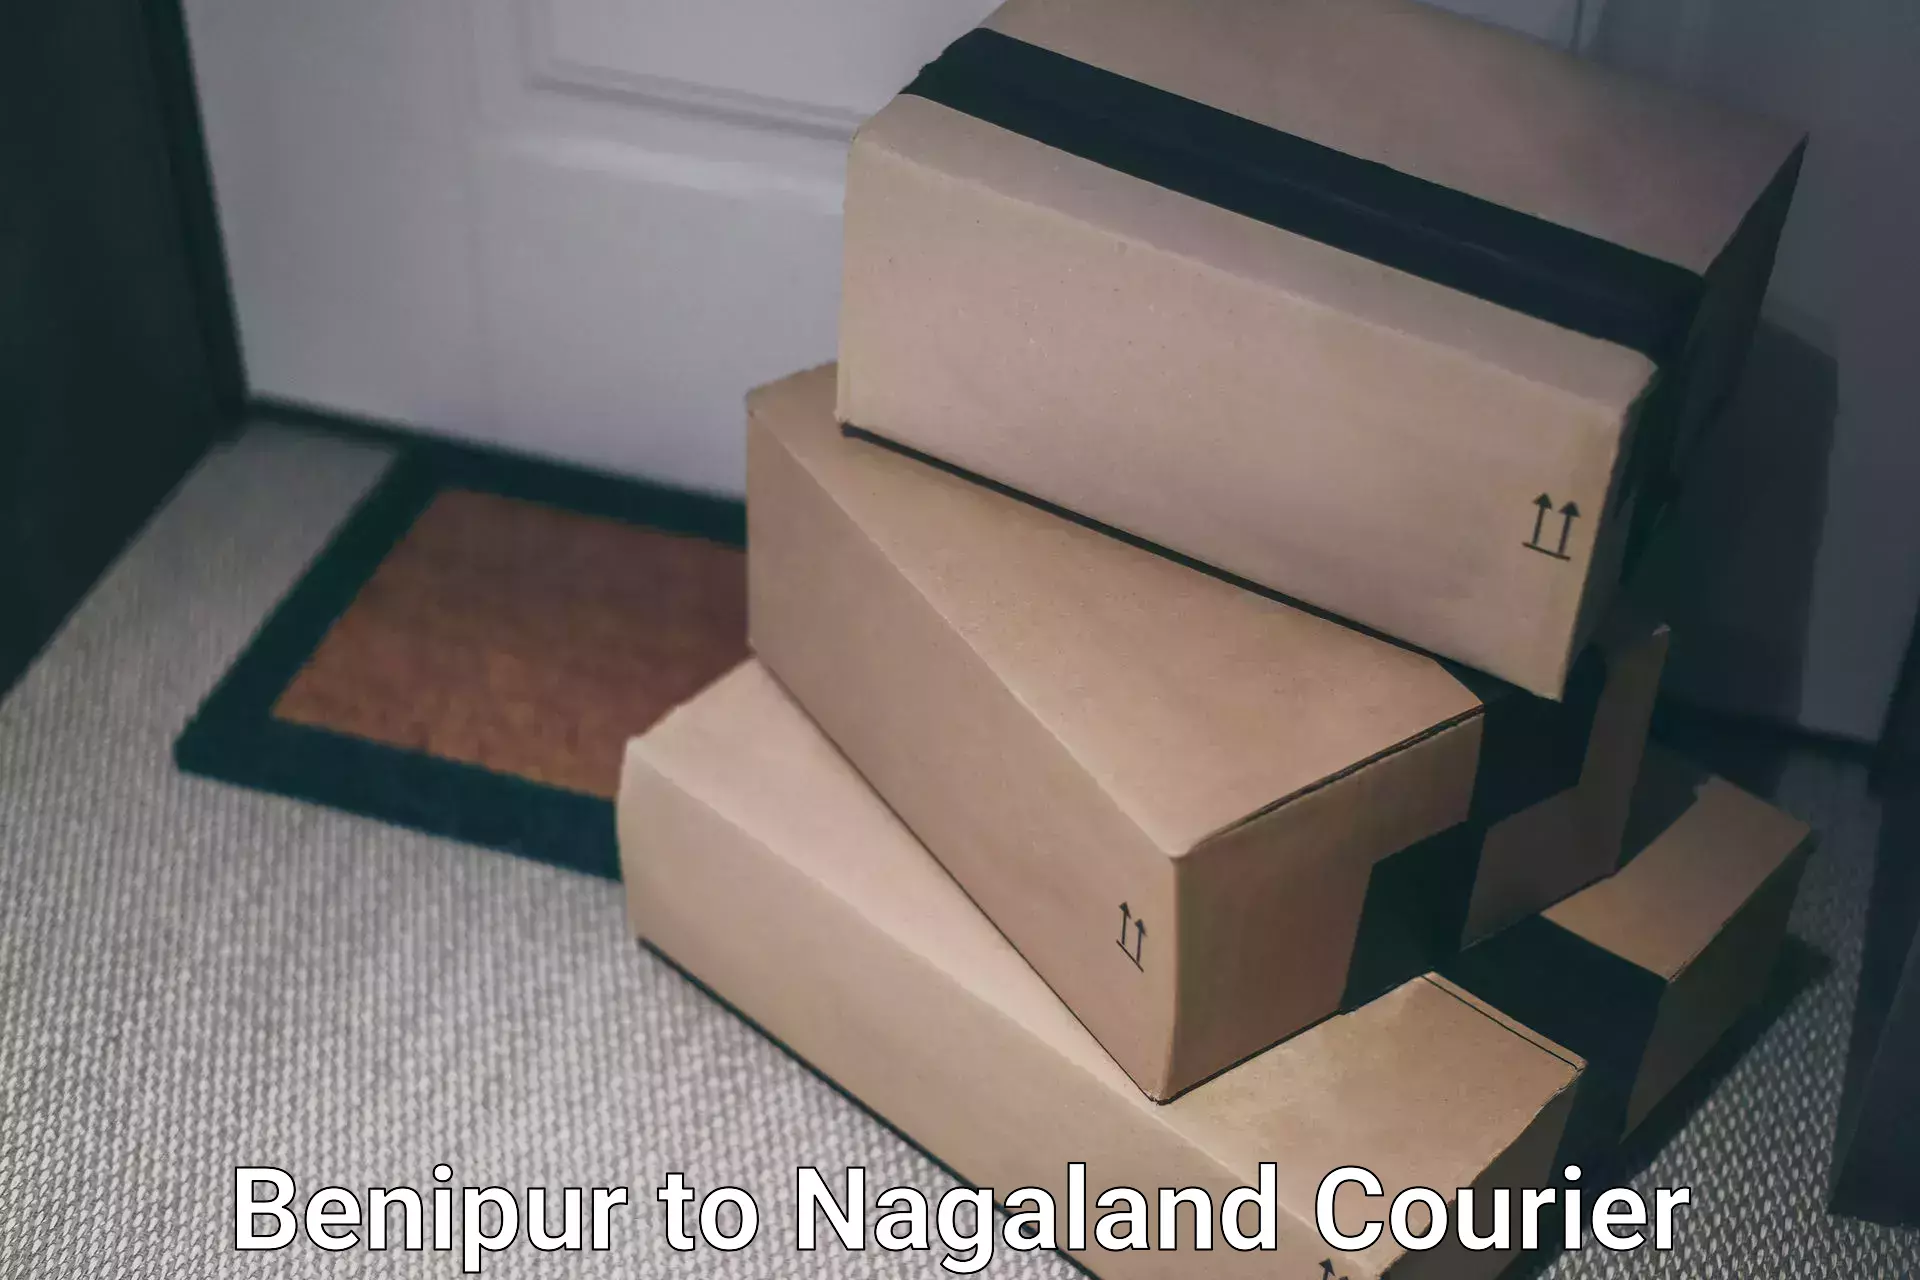 Advanced tracking systems Benipur to Nagaland